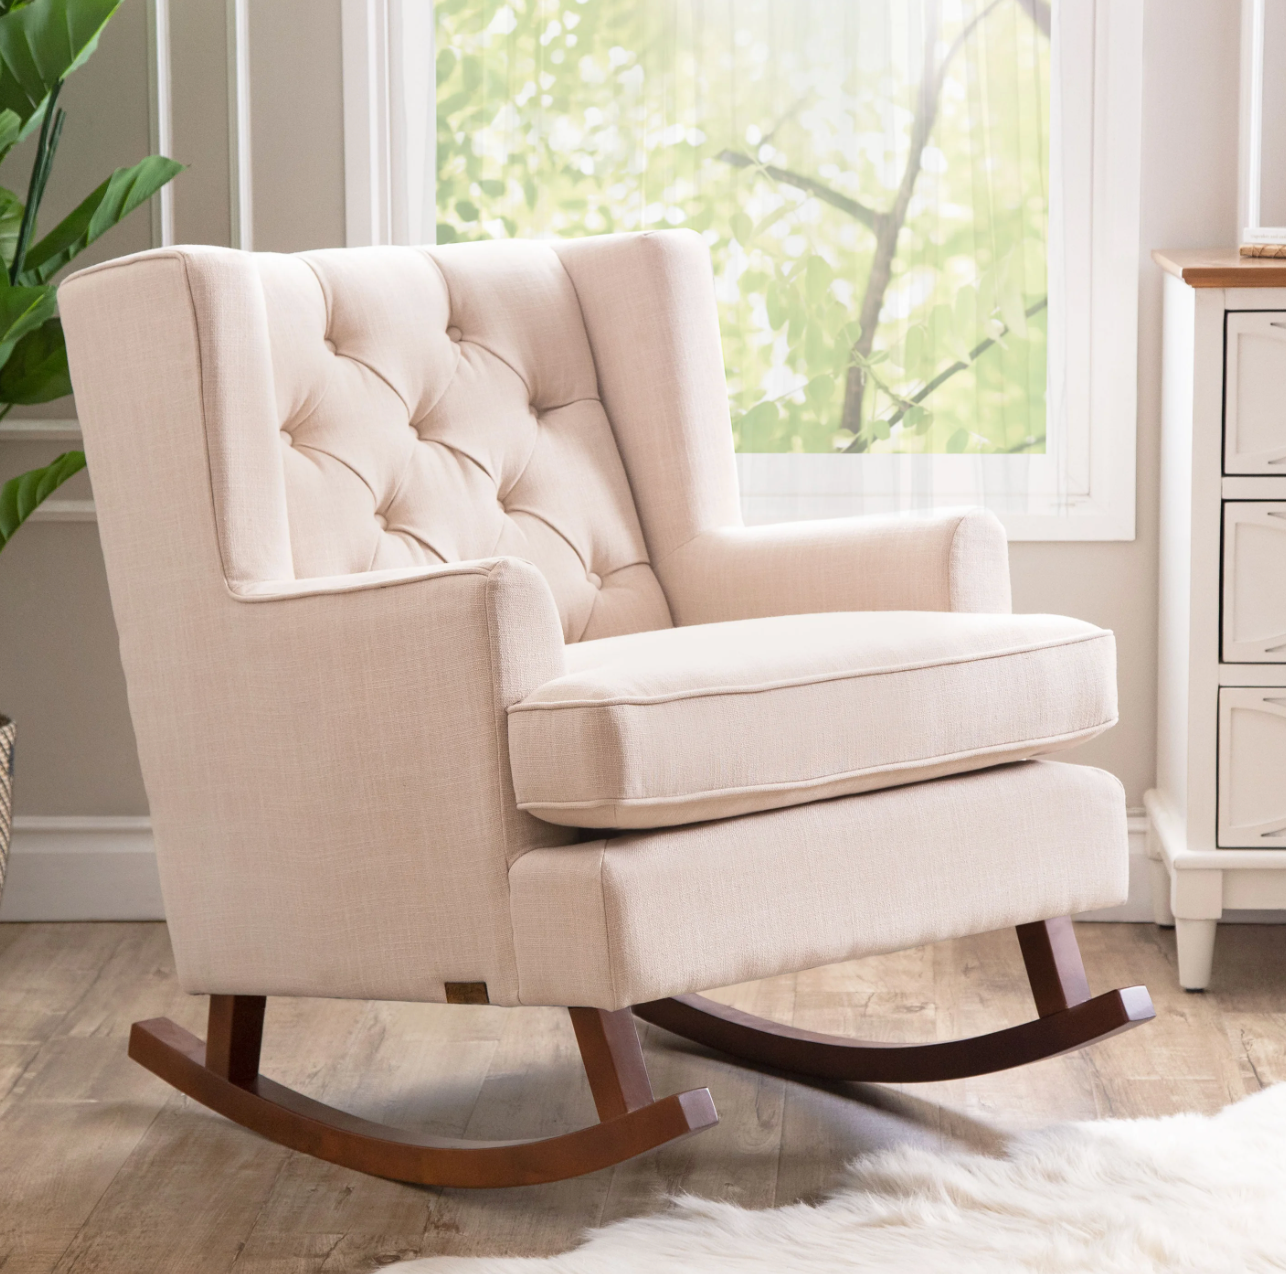 Cream plush arm chair rocking chair with a tufted backing and dark brown wooden gliders on hardwood floor